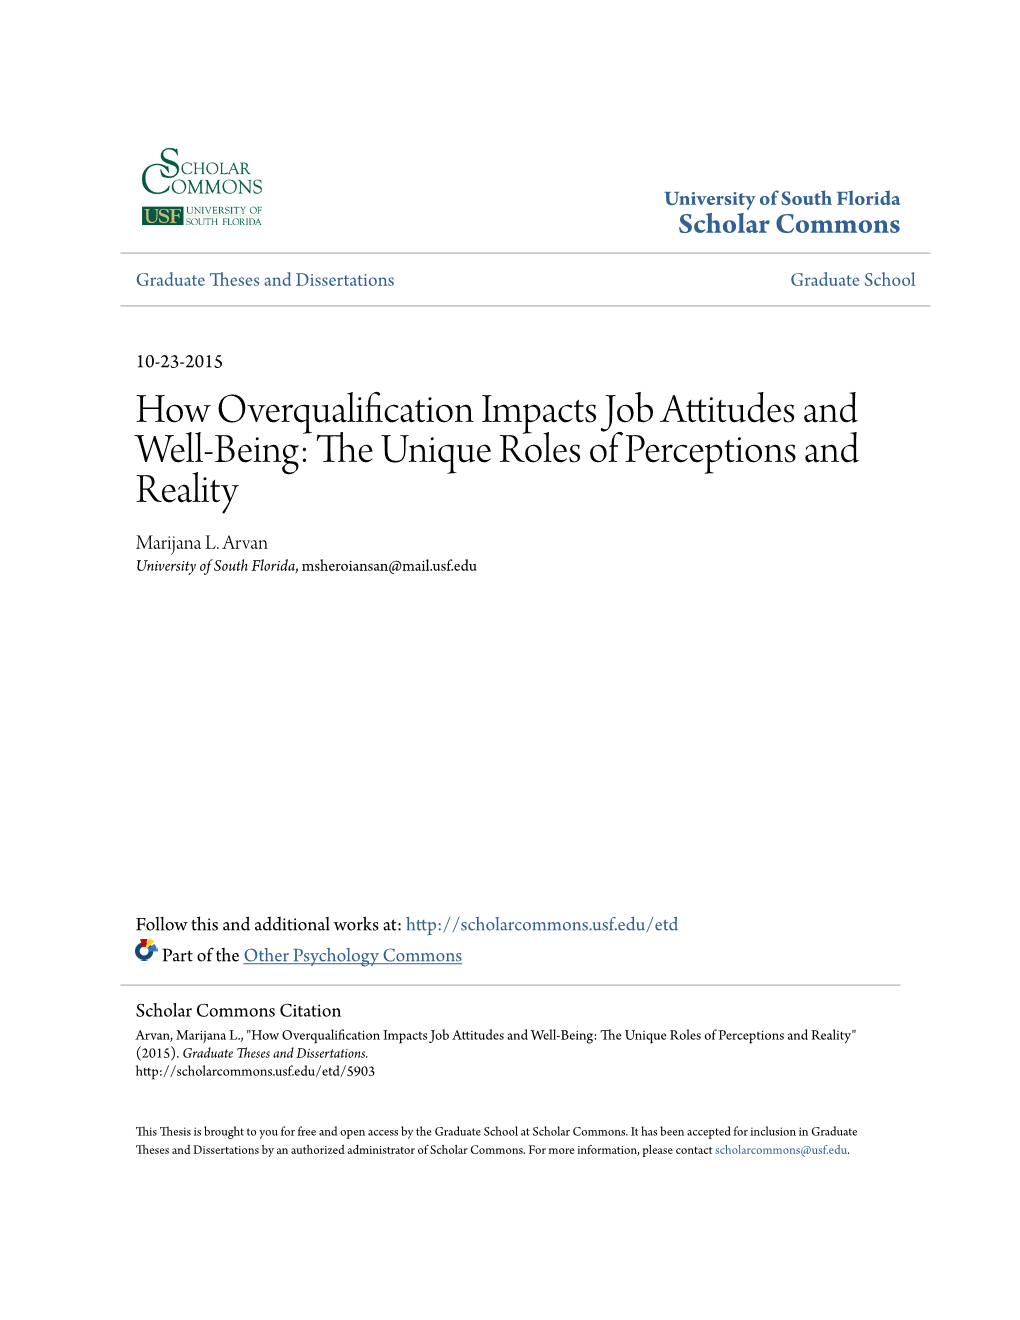 How Overqualification Impacts Job Attitudes and Well-Being: the Niqueu Roles of Perceptions and Reality Marijana L